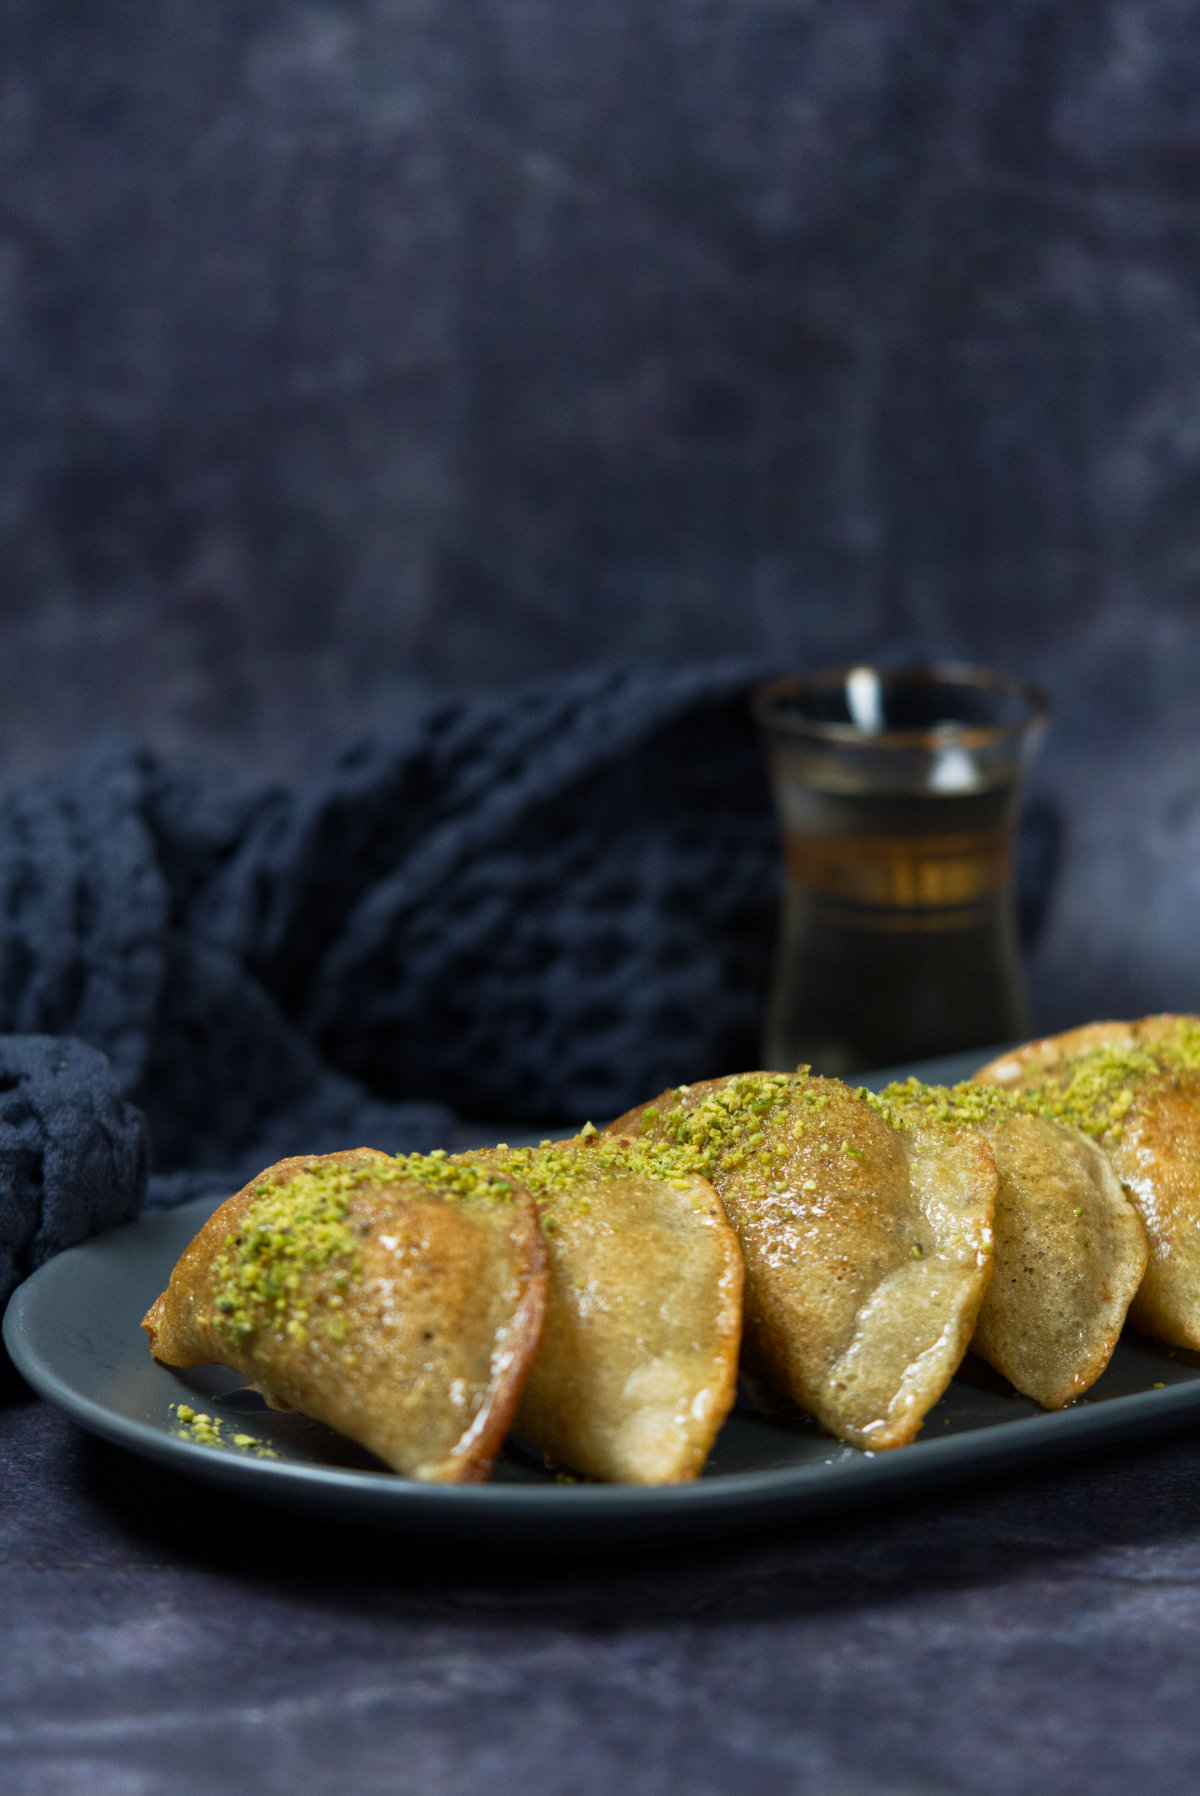 Baked atayef in a plate with an arabian tea in the background